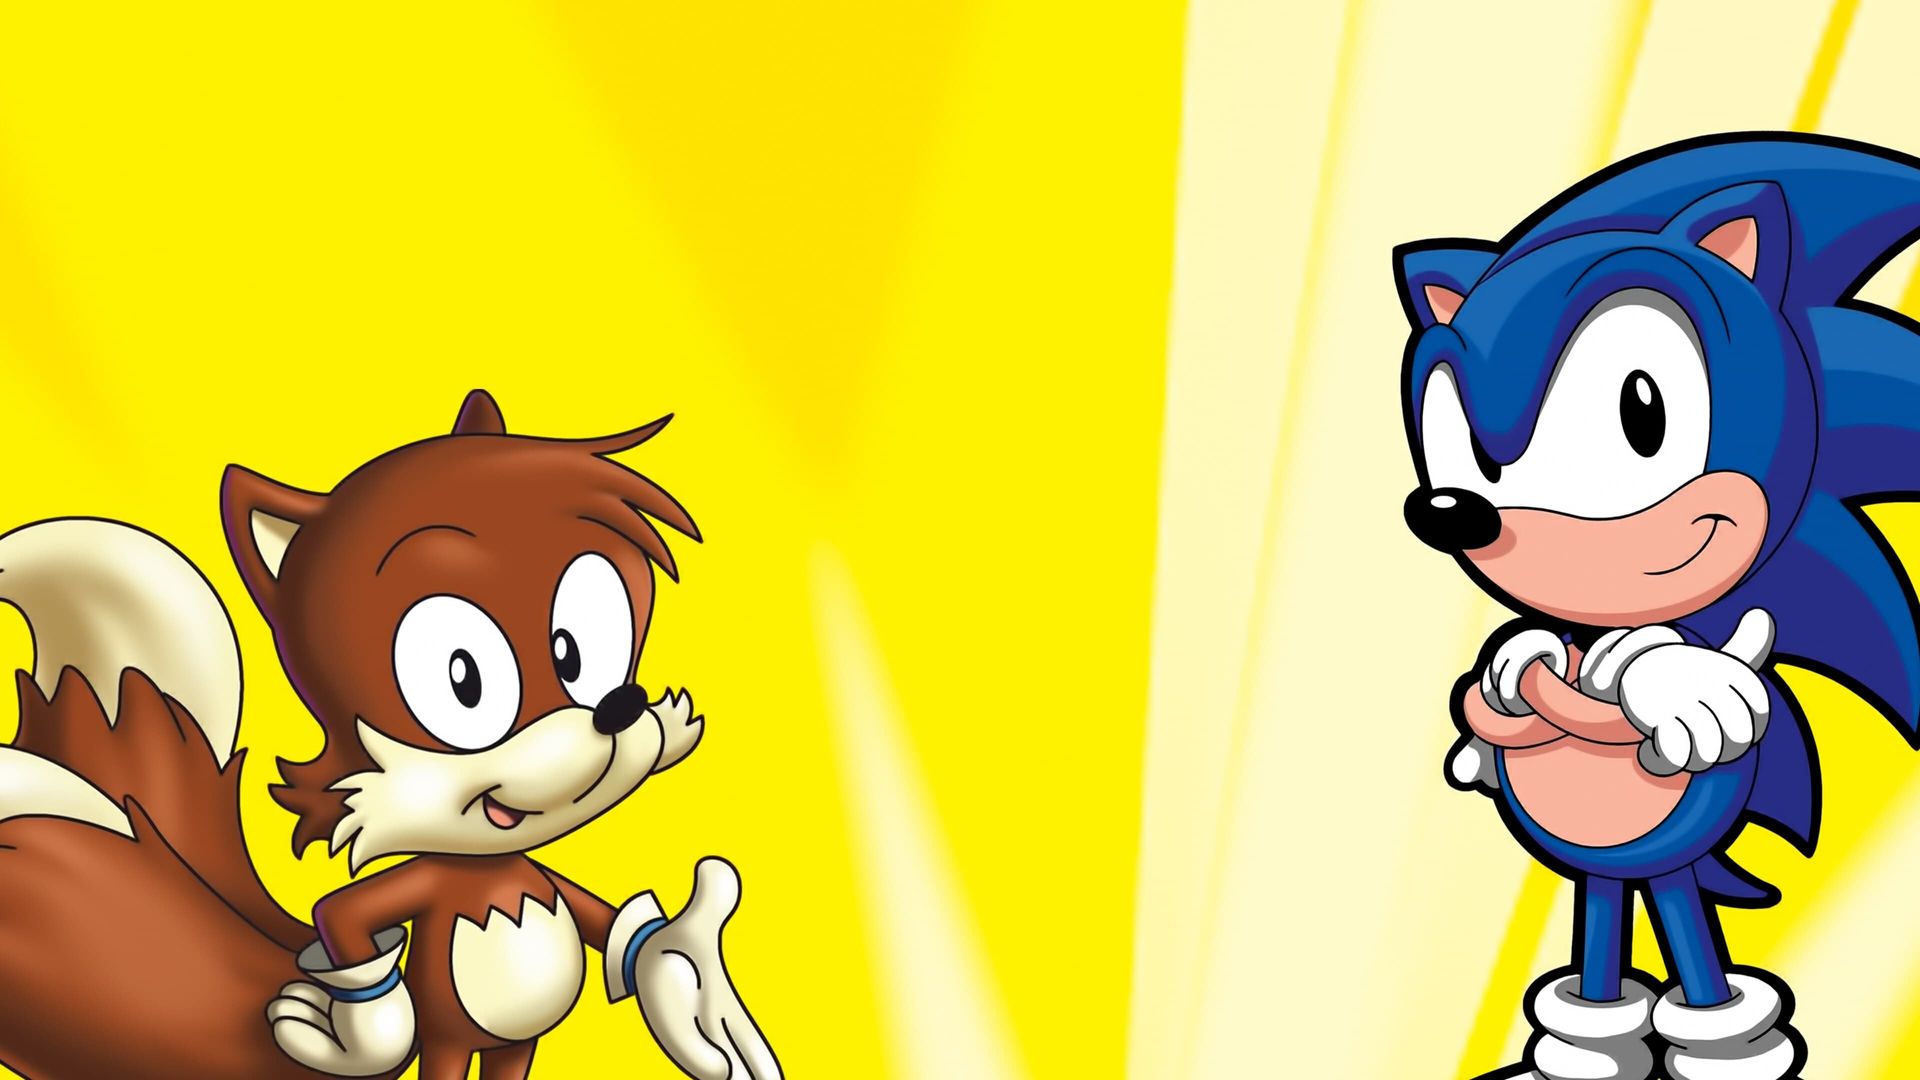 Sonic the Hedgehog background